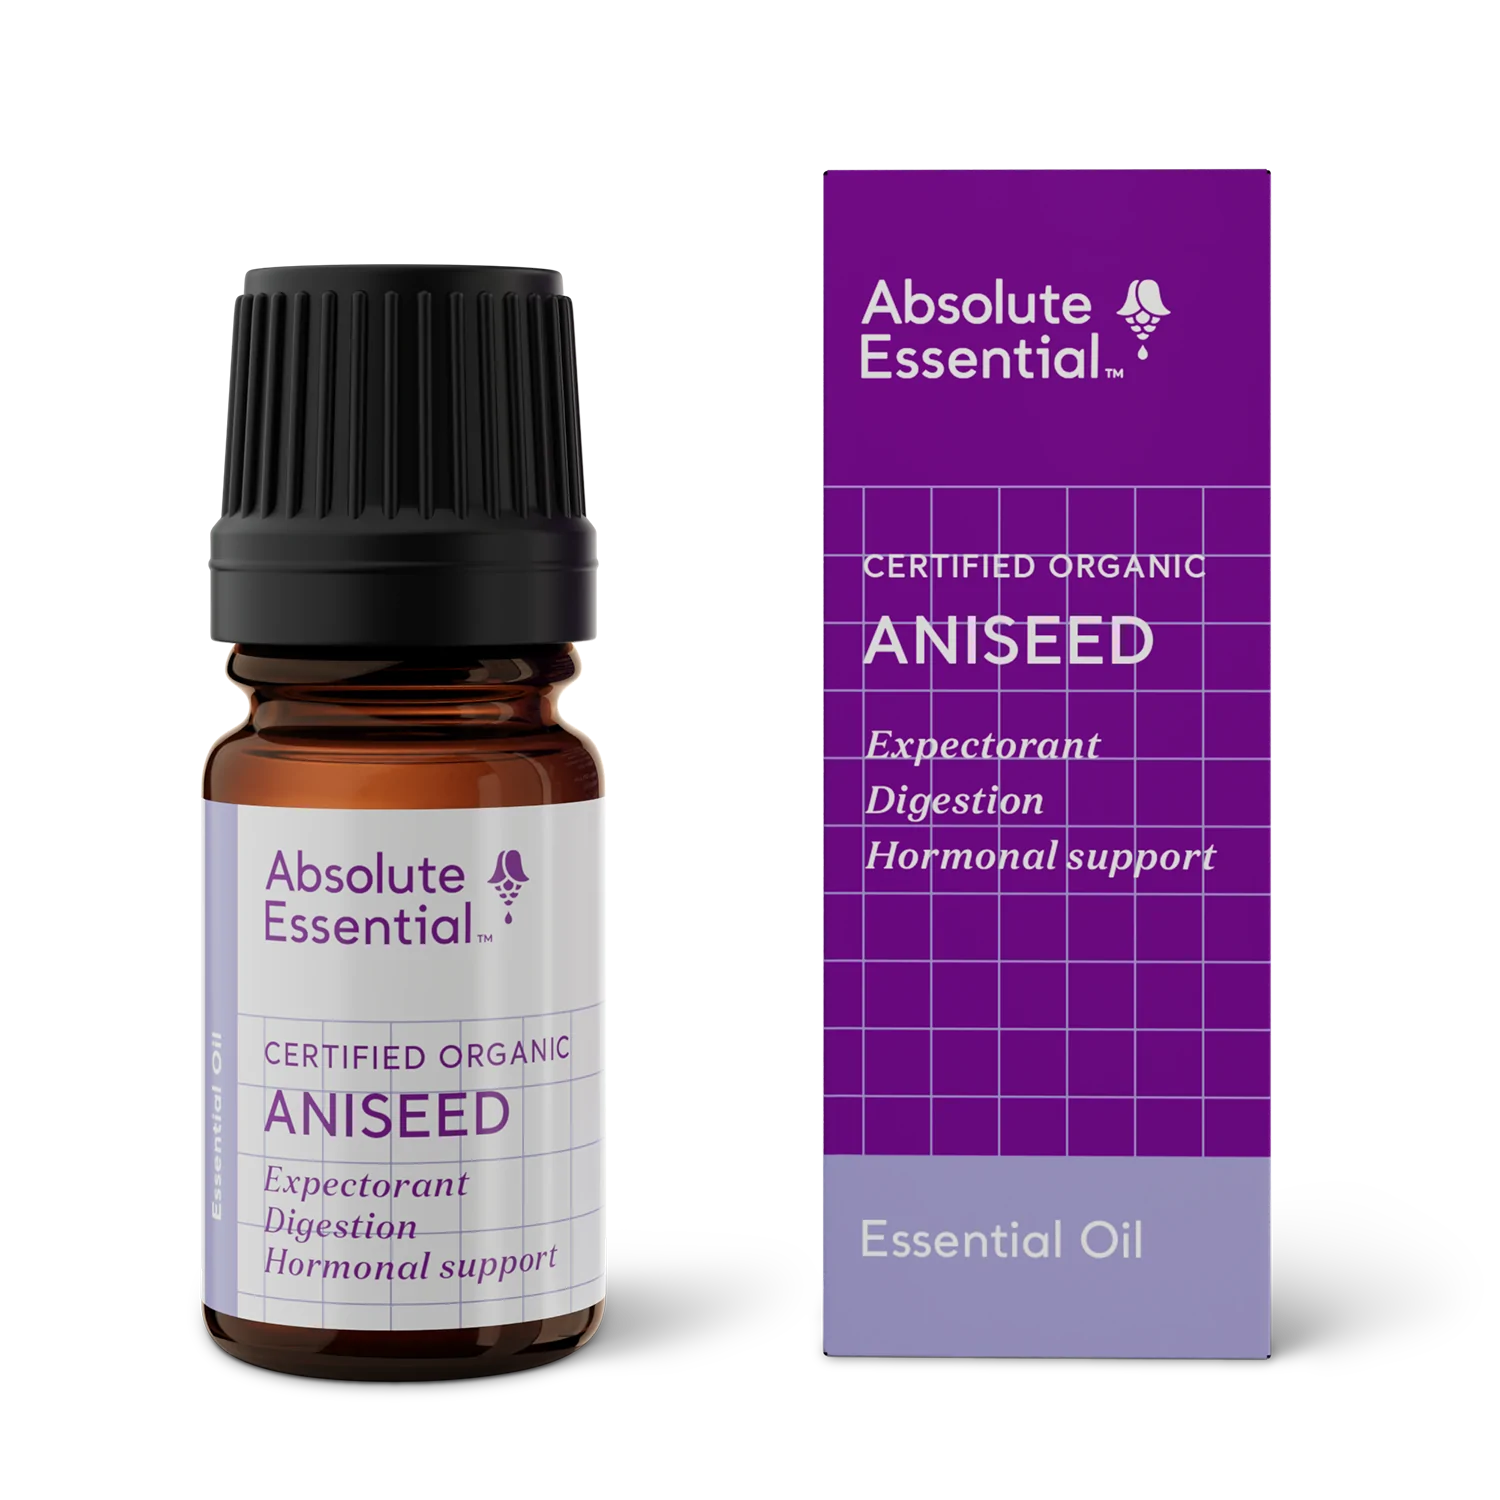 Absolute Essential Oil Aniseed